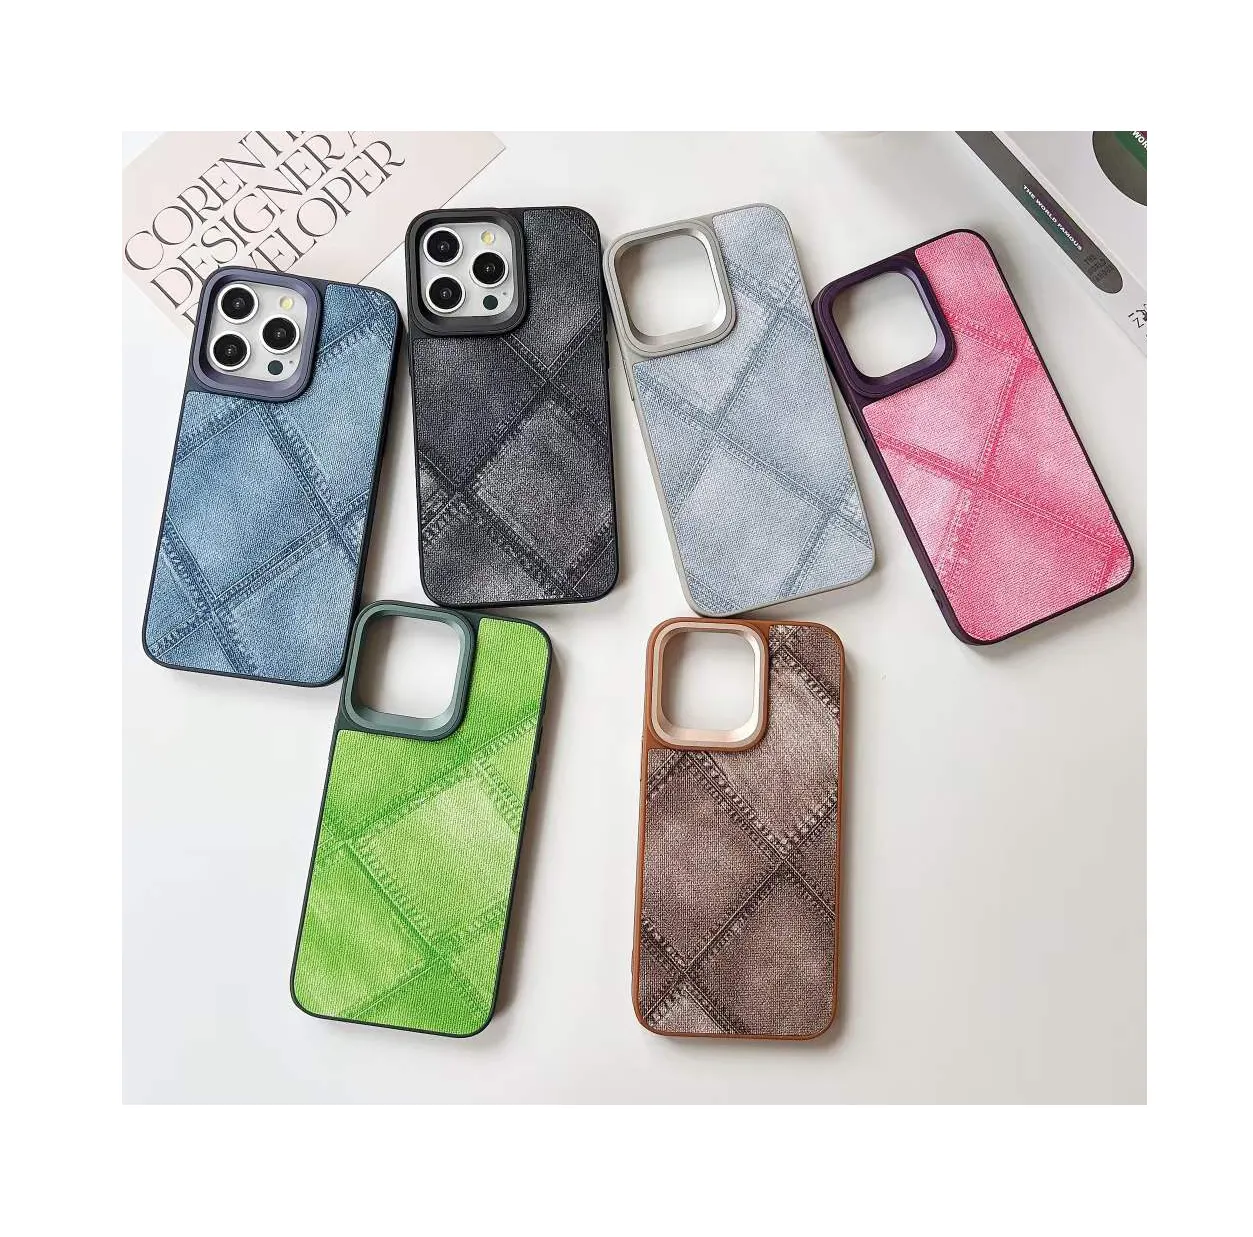 Shanhui Custom Print Leather Phone Case Waterproof with Lens Protector and Coque pour telephone portable for iPhone XS